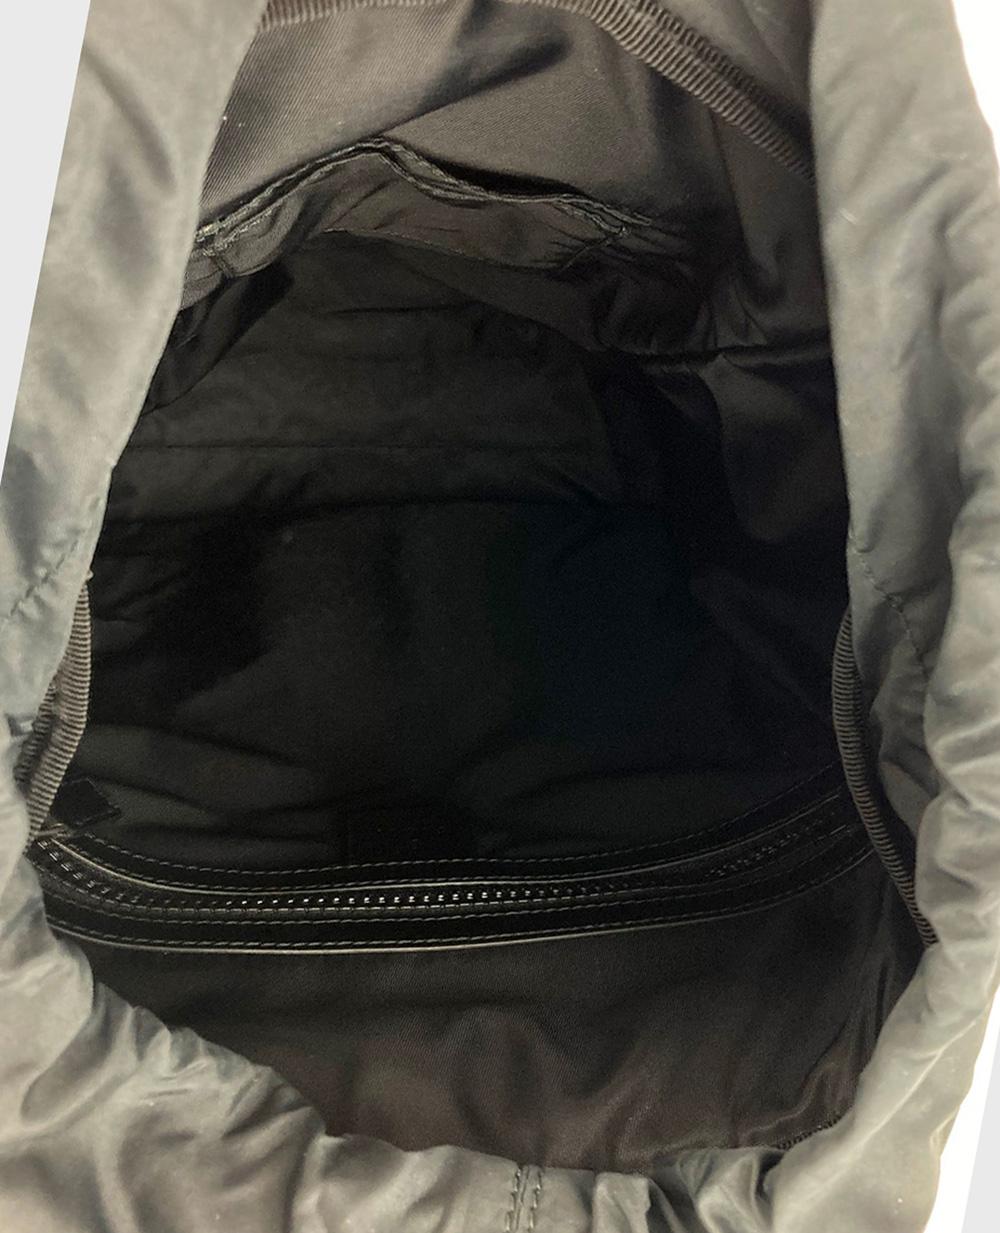 Gucci L'Aveugle Par Amour Techpack Backpack In New Condition For Sale In Philadelphia, PA